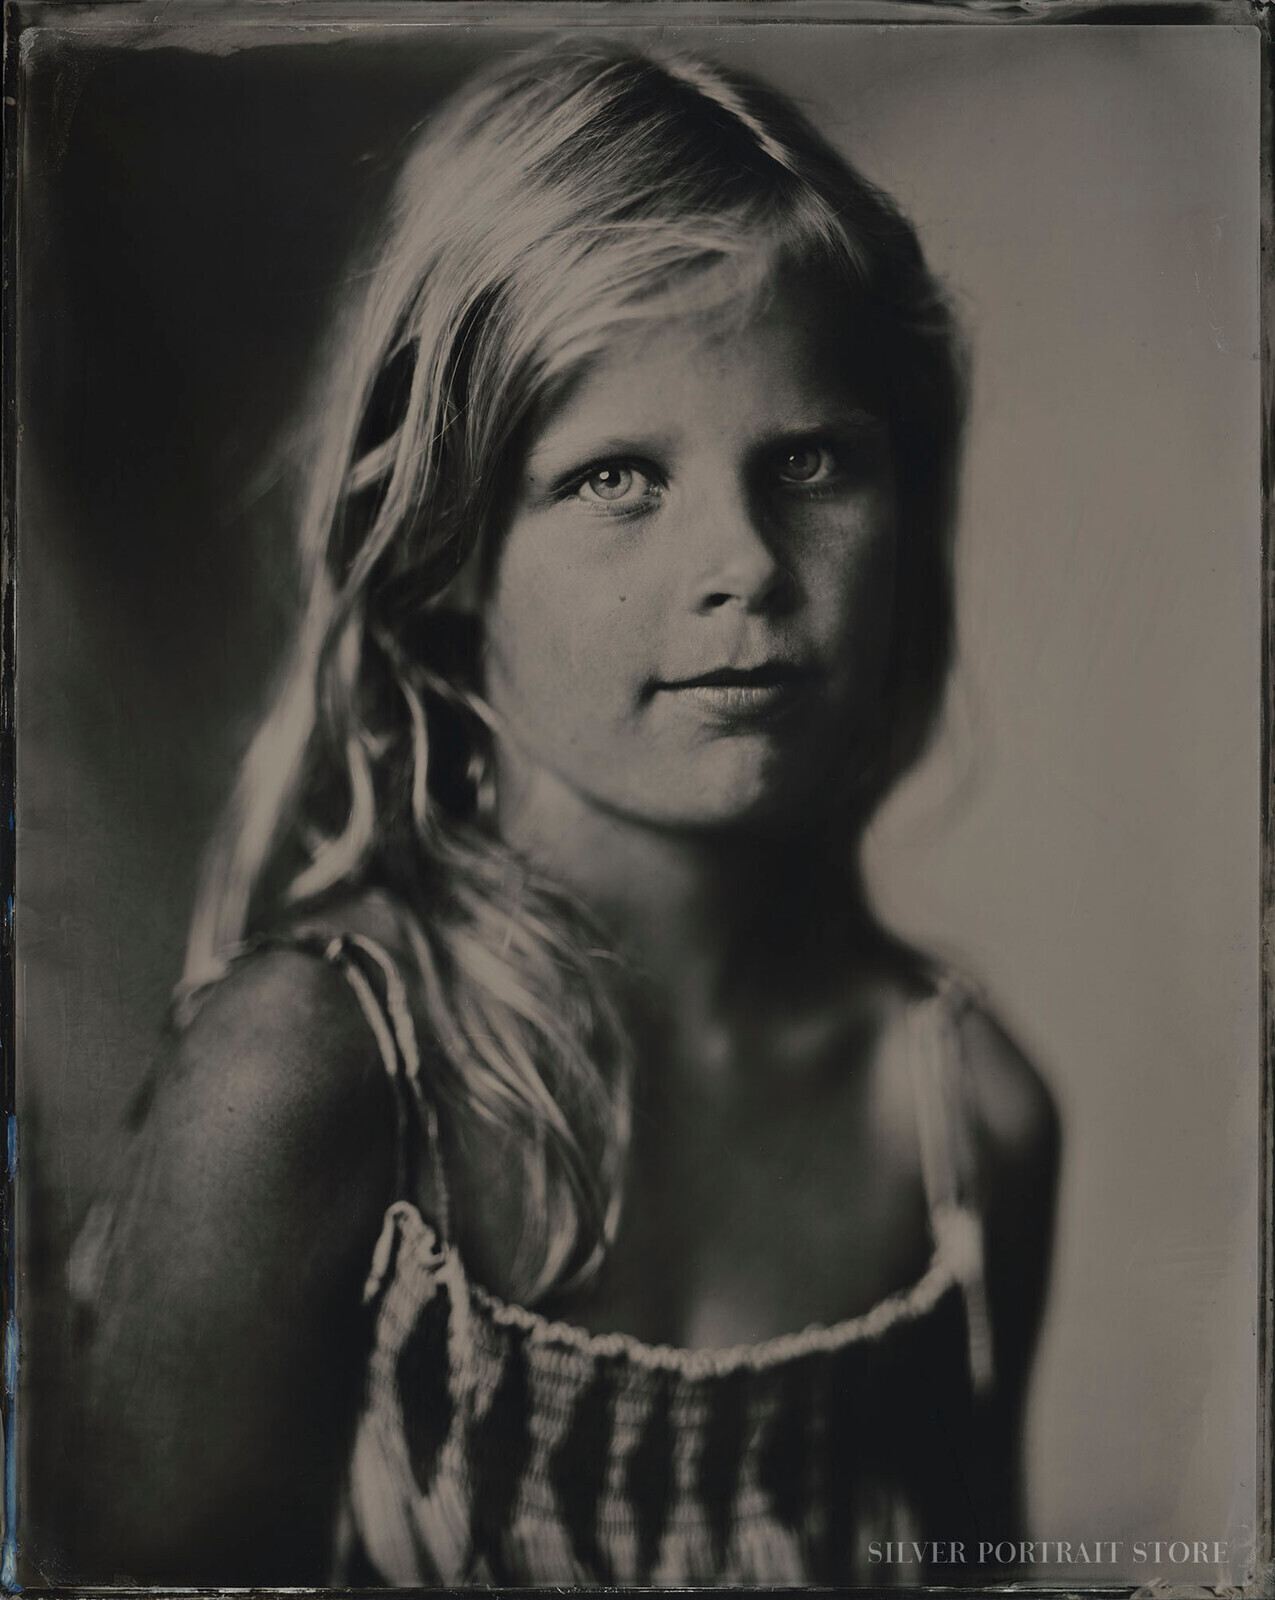 Anna Sophie-Silver Portrait Store-Wet plate collodion-Tintype 20 x 25 cm.